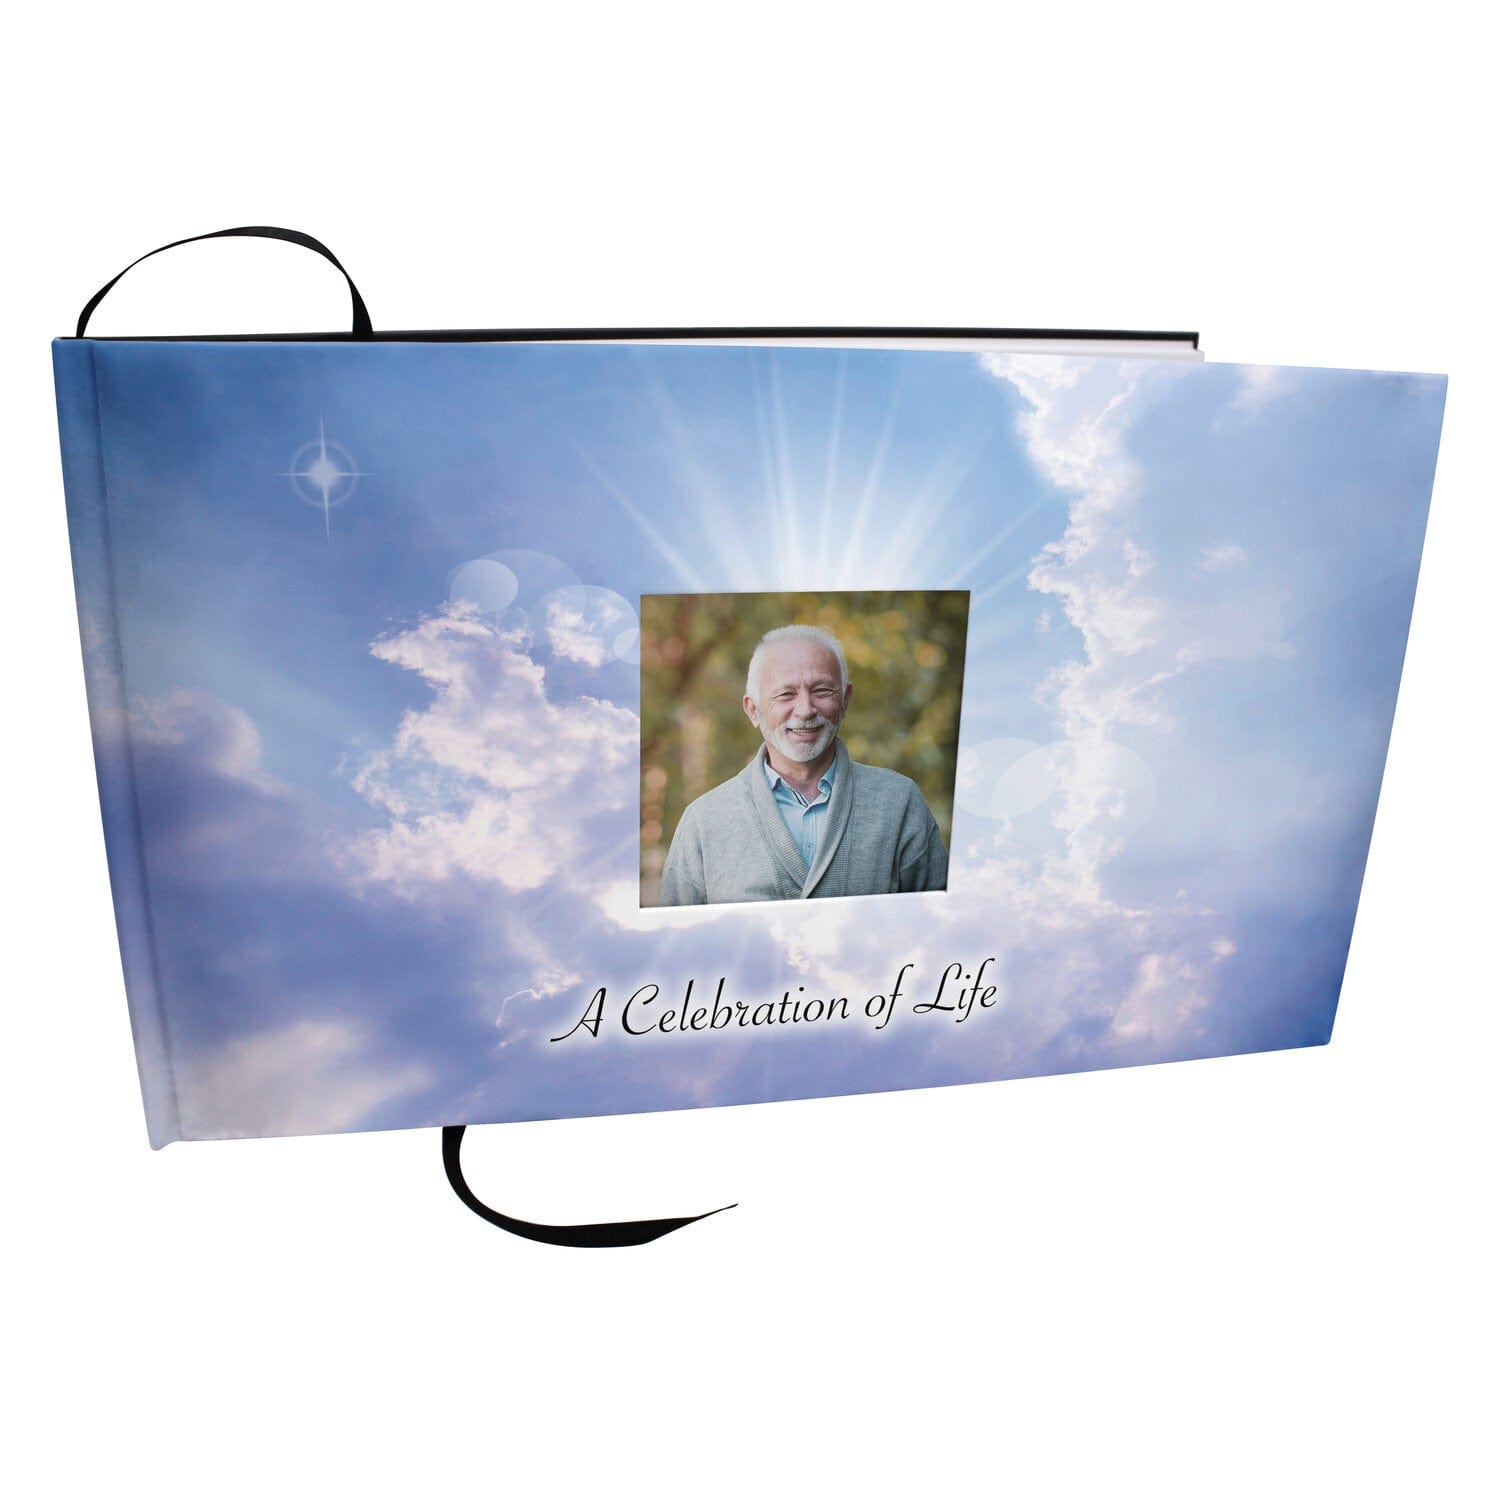 Commemorative Cremation Urns Heavenly Cross Matching Themed 'Celebration of Life' Guest Book for Funeral or Memorial Service